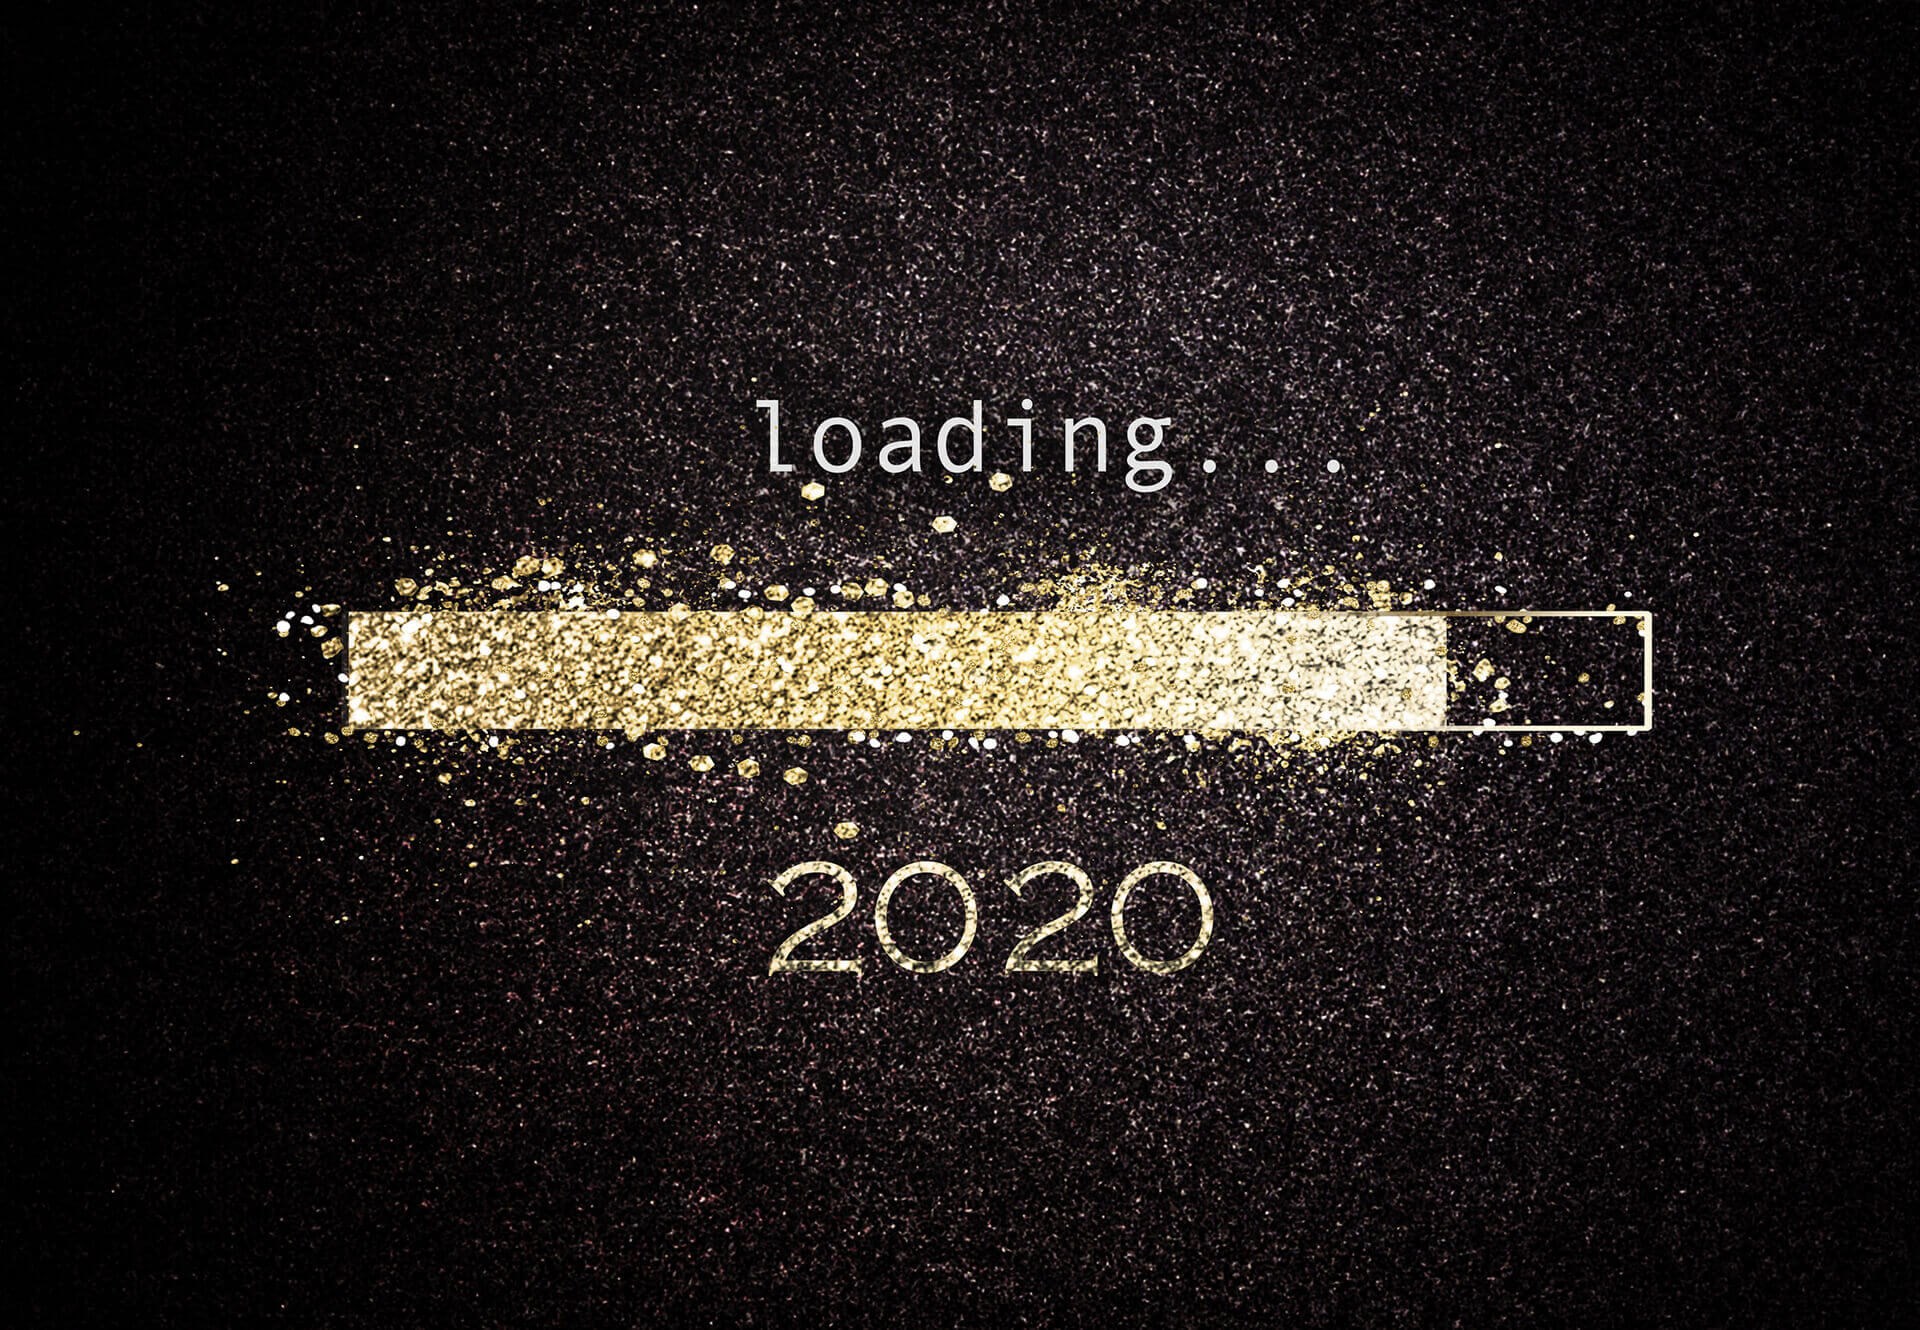 Do you have a 2020 website and marketing plan?